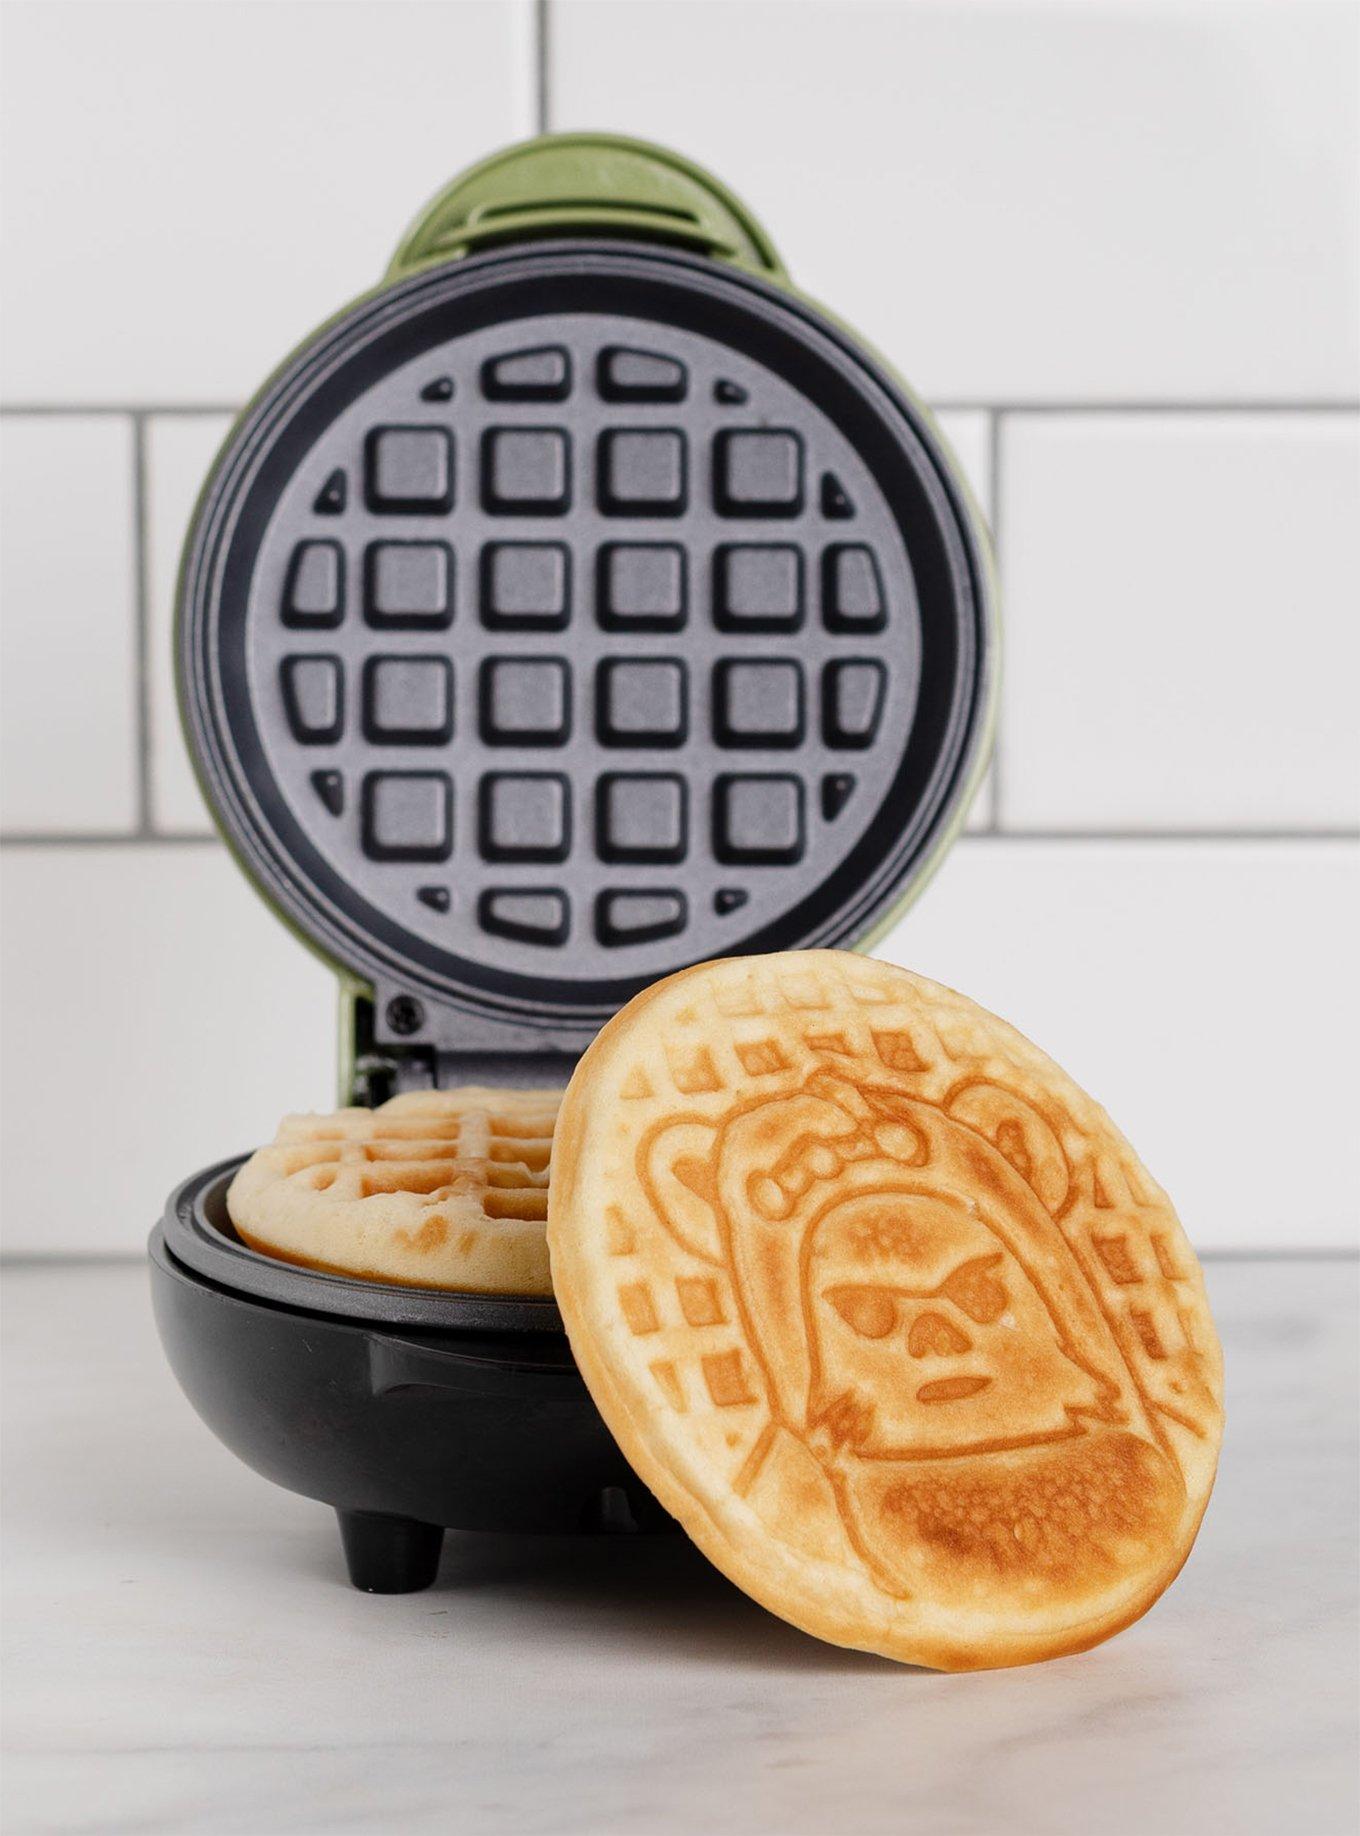 Welcome to the Waffle Evolution, Waffle Maker